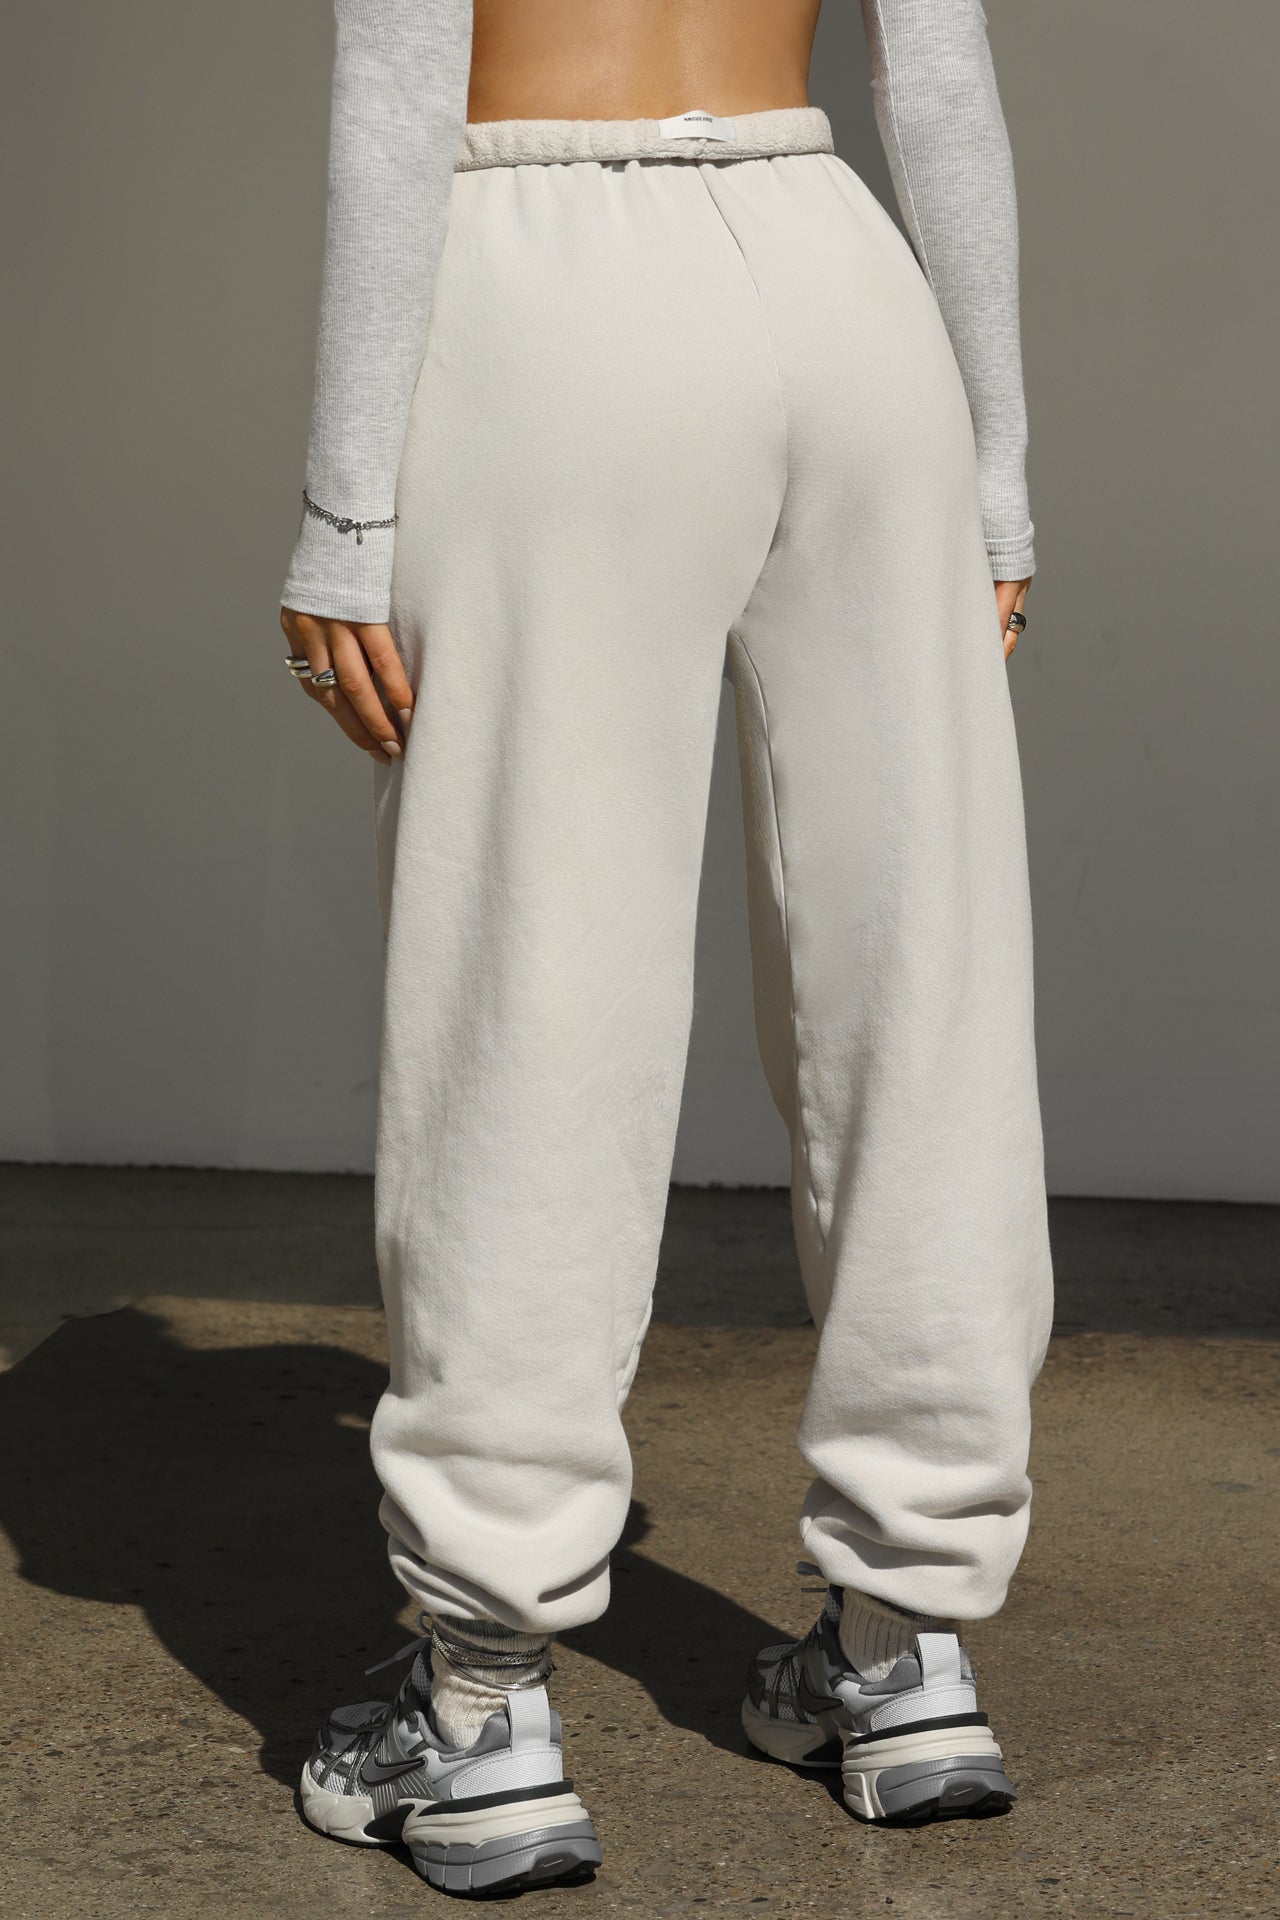 Back view of model from the waist down wearing the oversized loose fit sahara french terry Oversized Jogger with an elastic waistband and ankle cuffs